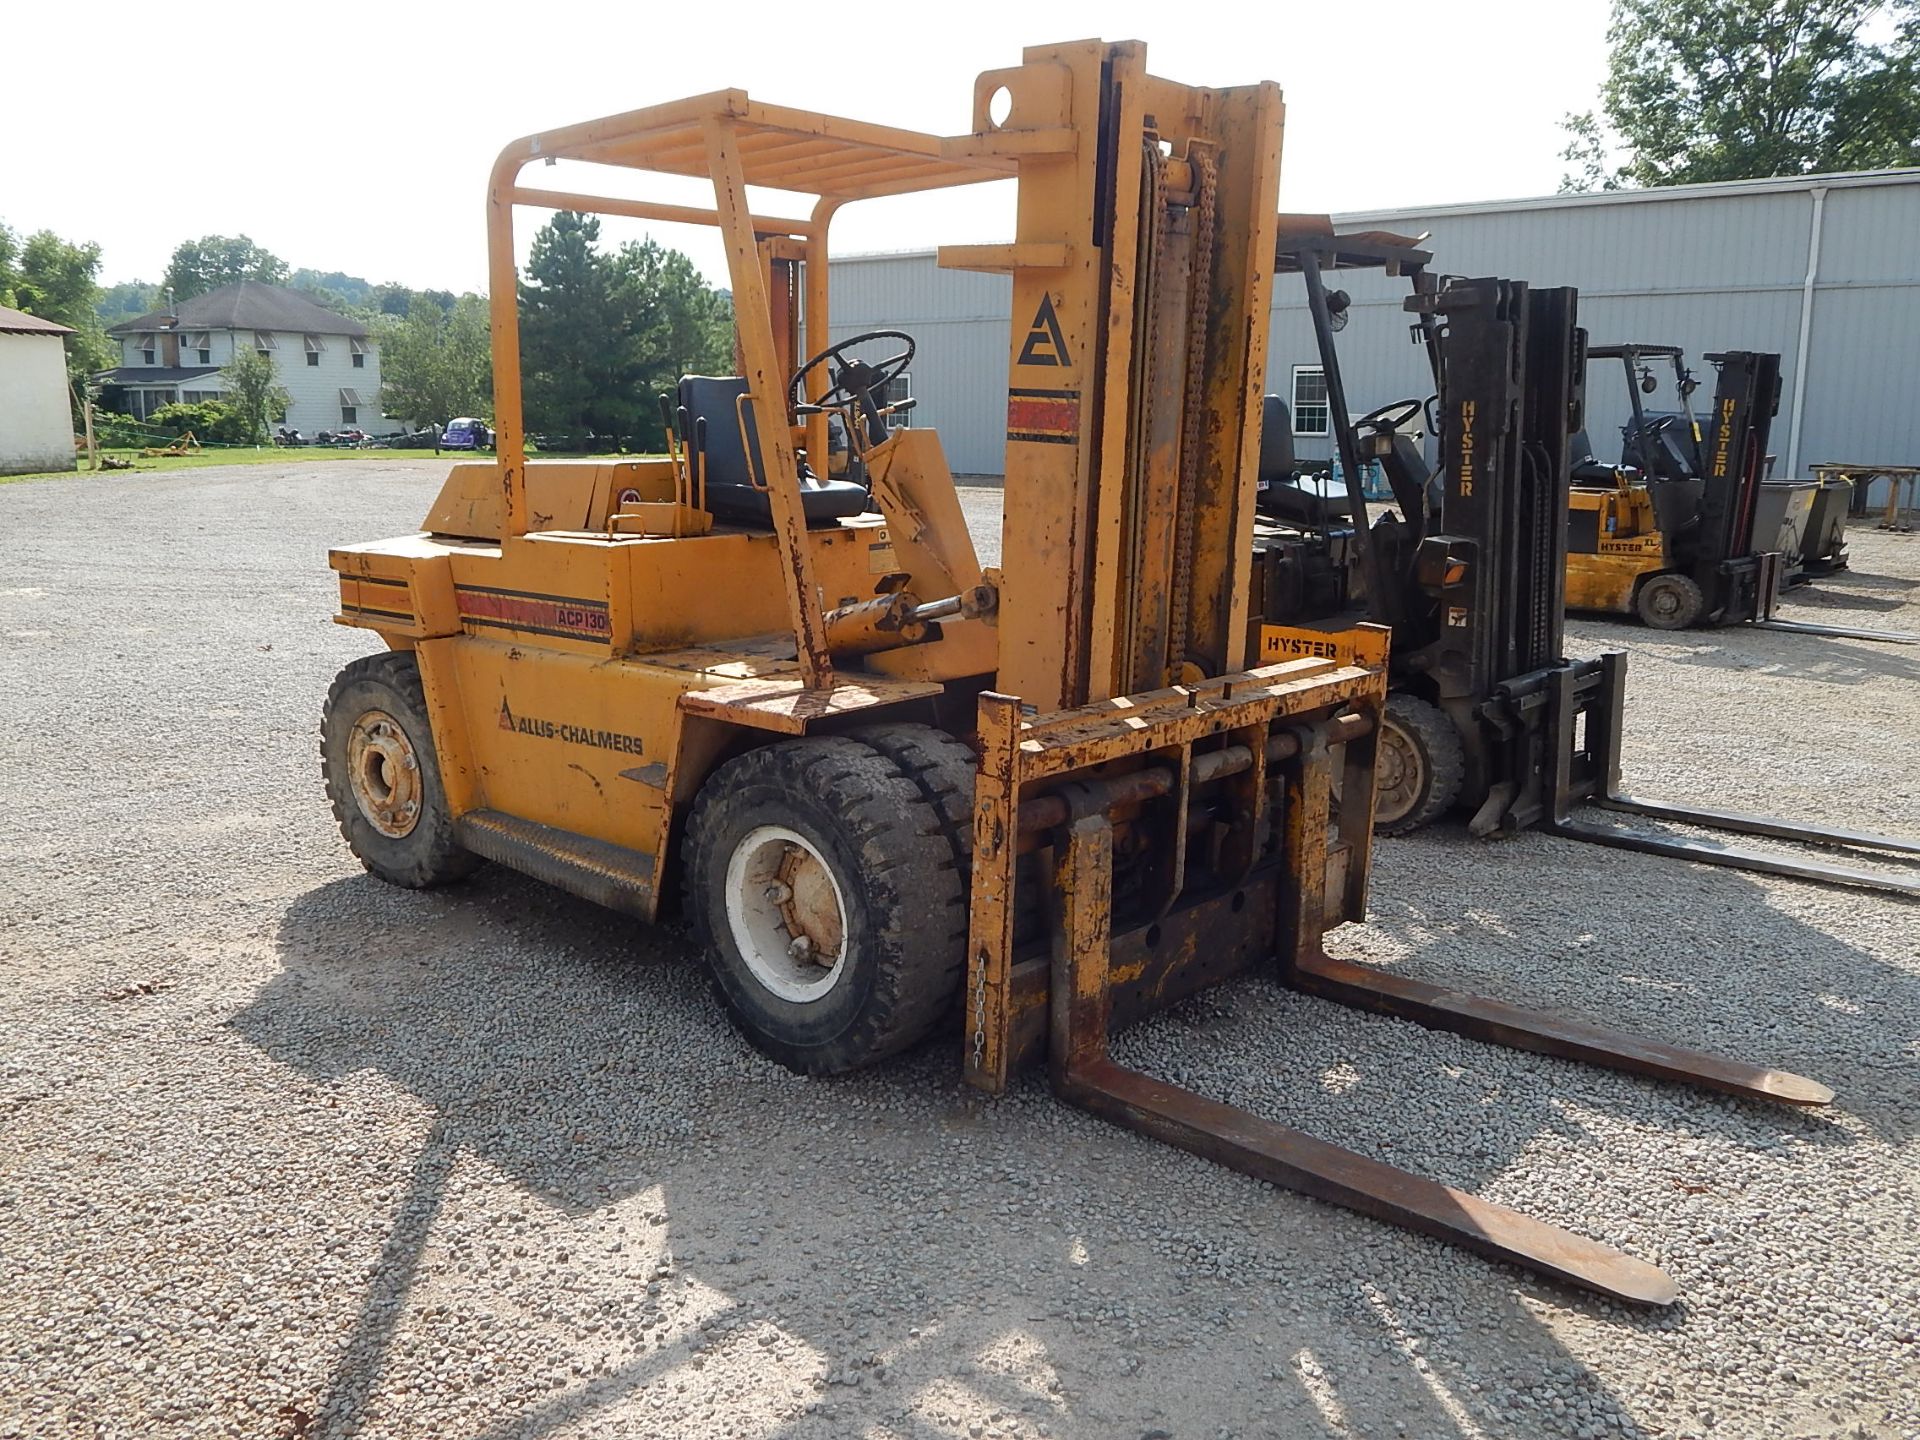 Allis Chalmers Model ACP130 Fork Lift, s/n AMF110894, 12,900 Lb. Capacity, Gas, All Terrain Tires, - Image 4 of 10